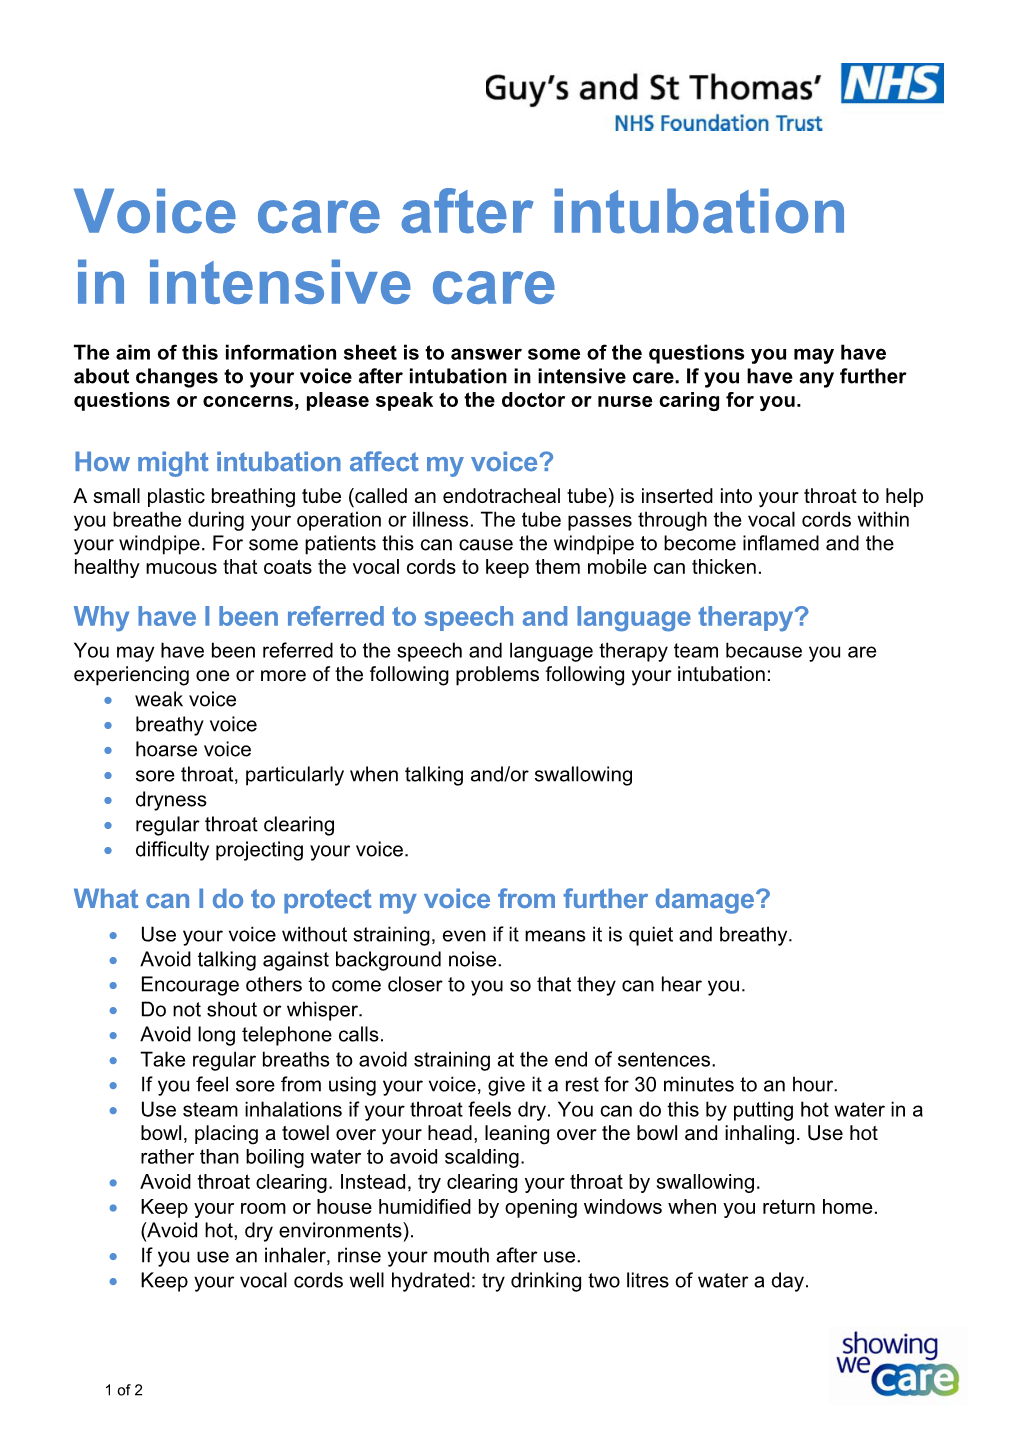 Voice Care After Intubation in Intensive Care